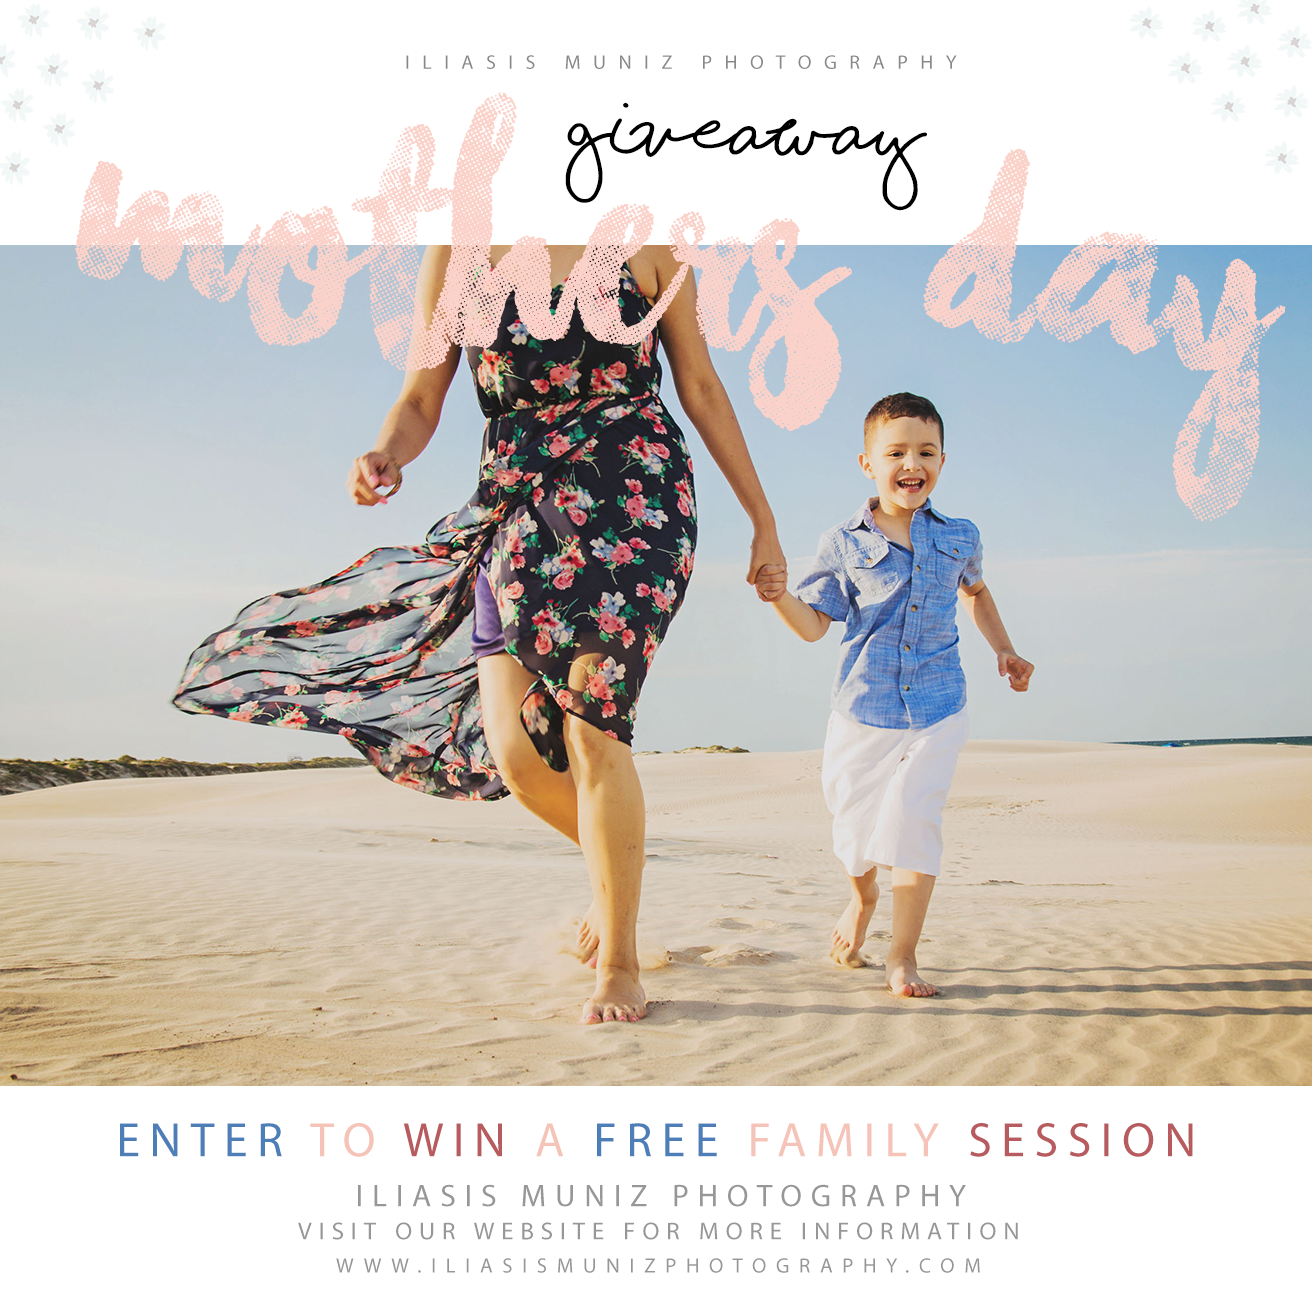 Mother's Day Giveaway! Iliasis Muniz Photography